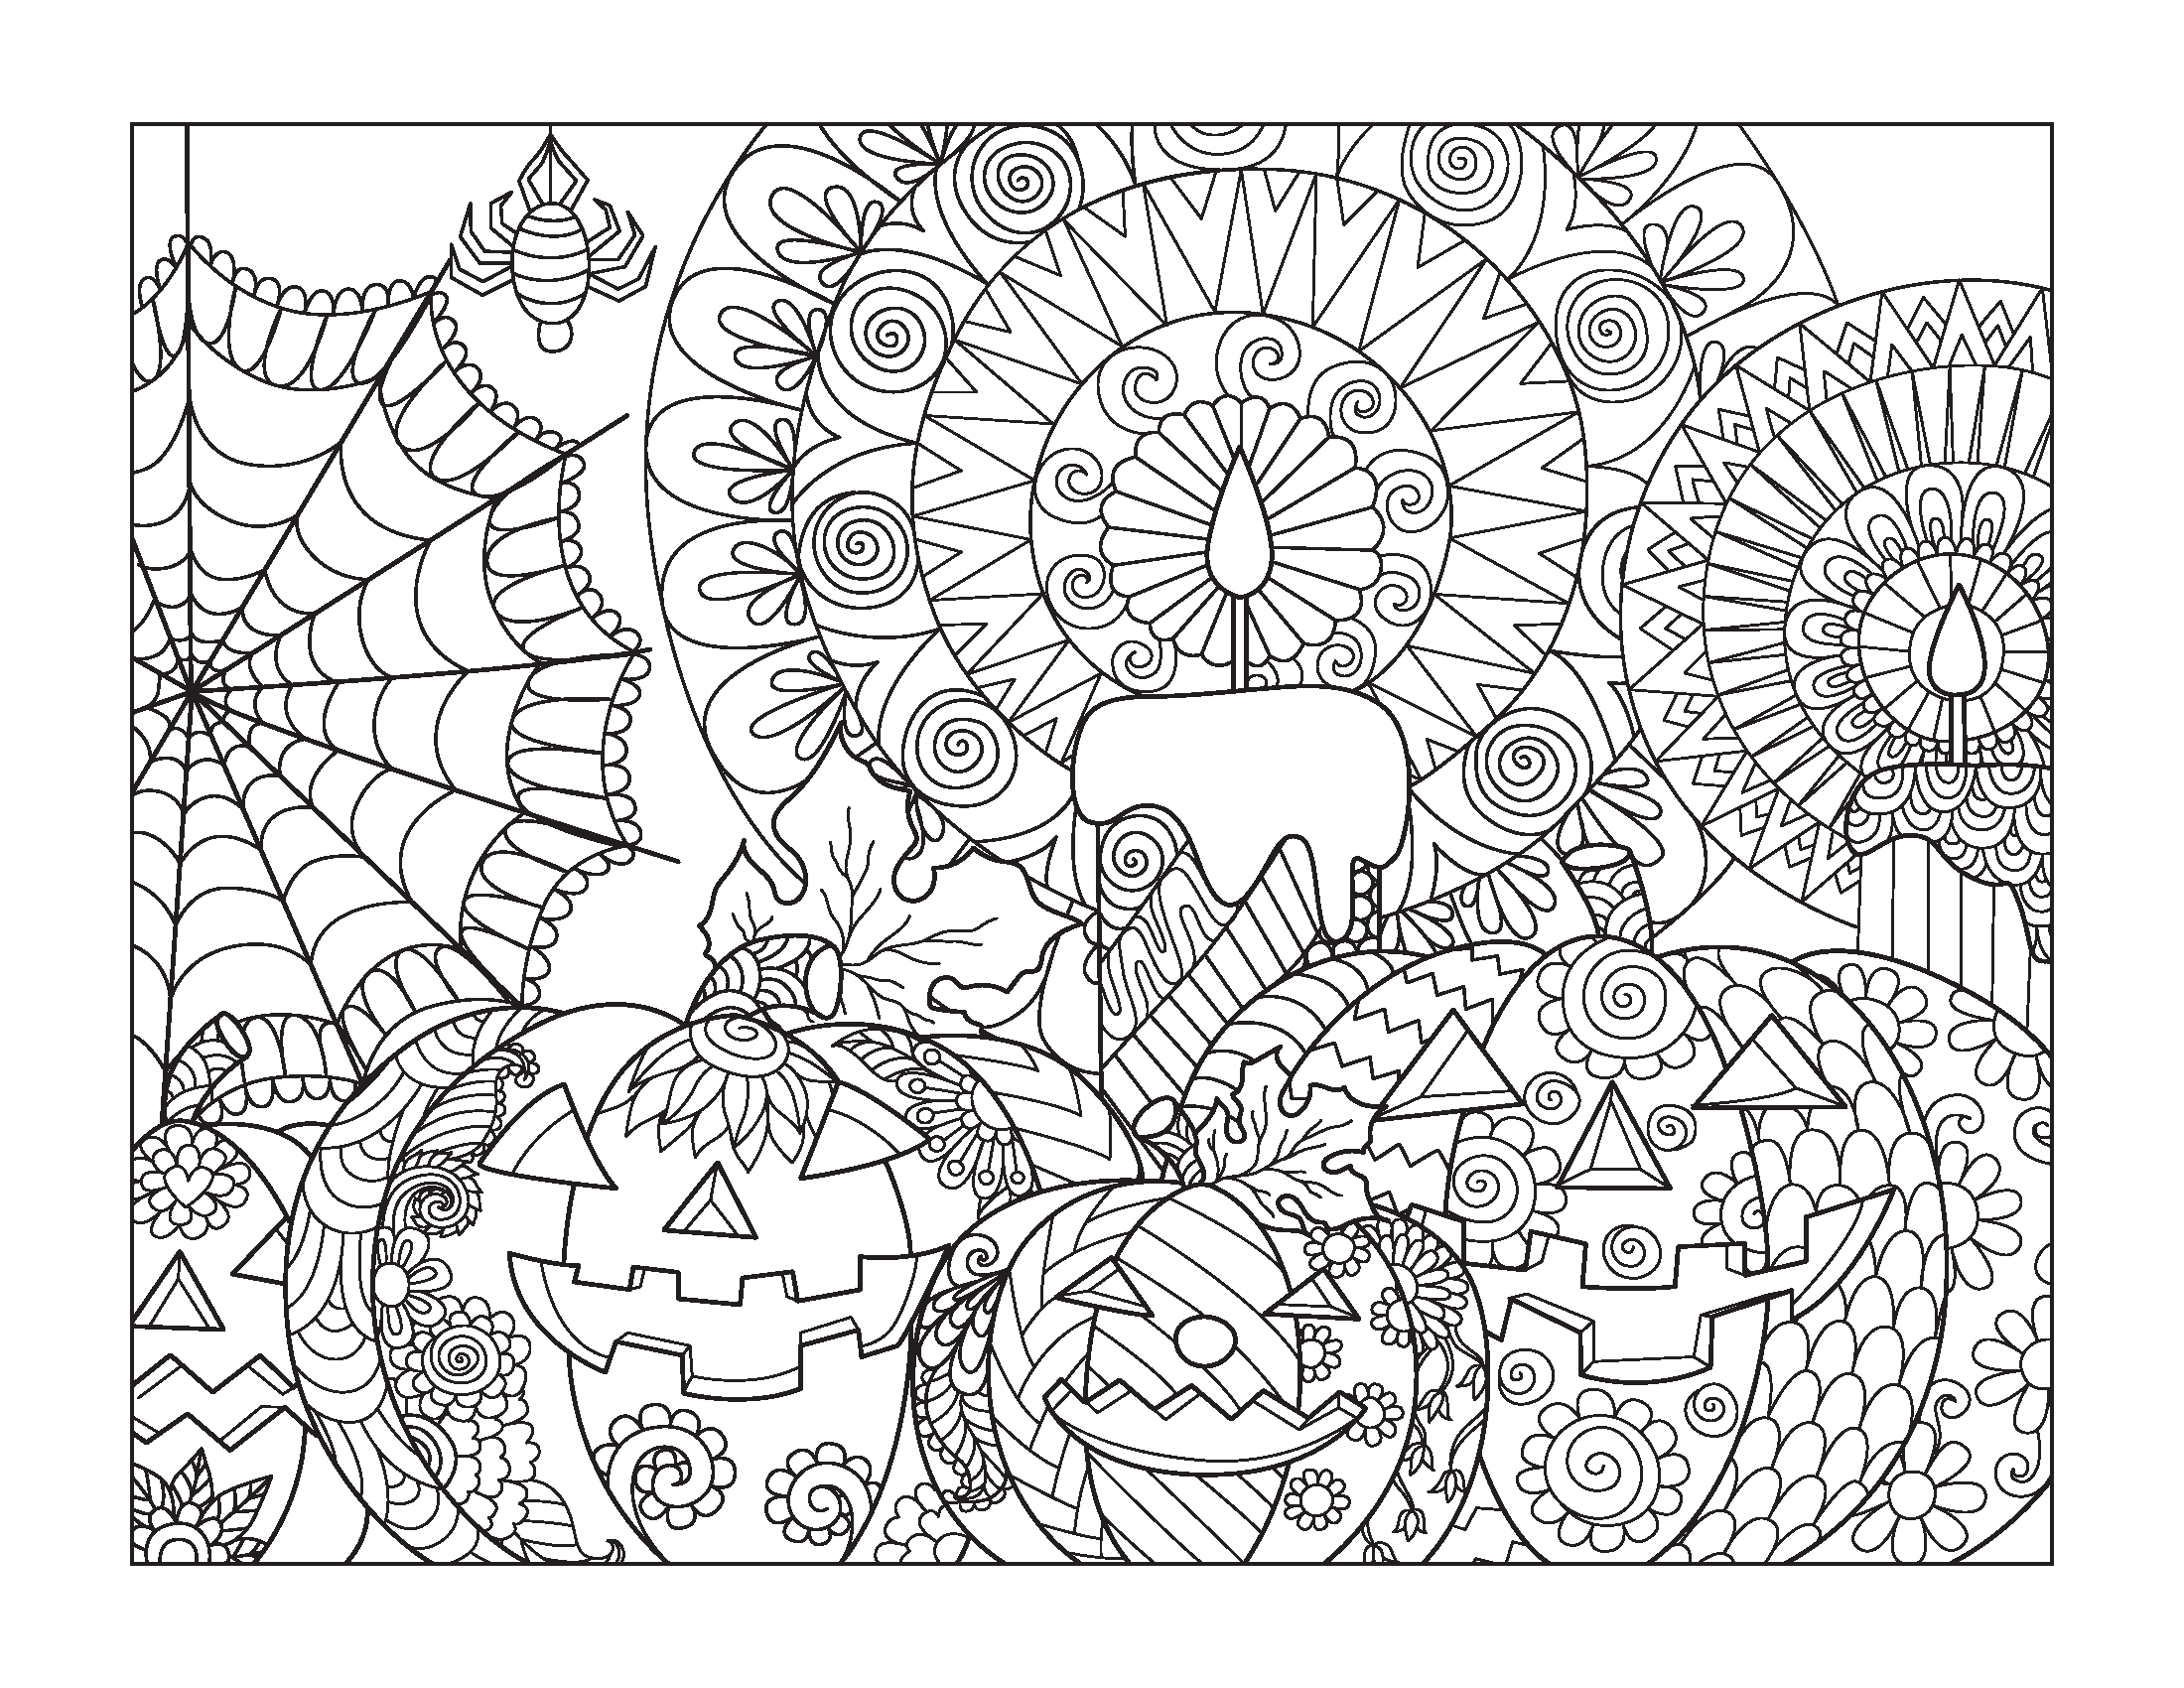 Halloween Coloring Pages for older kids   Gift of Curiosity